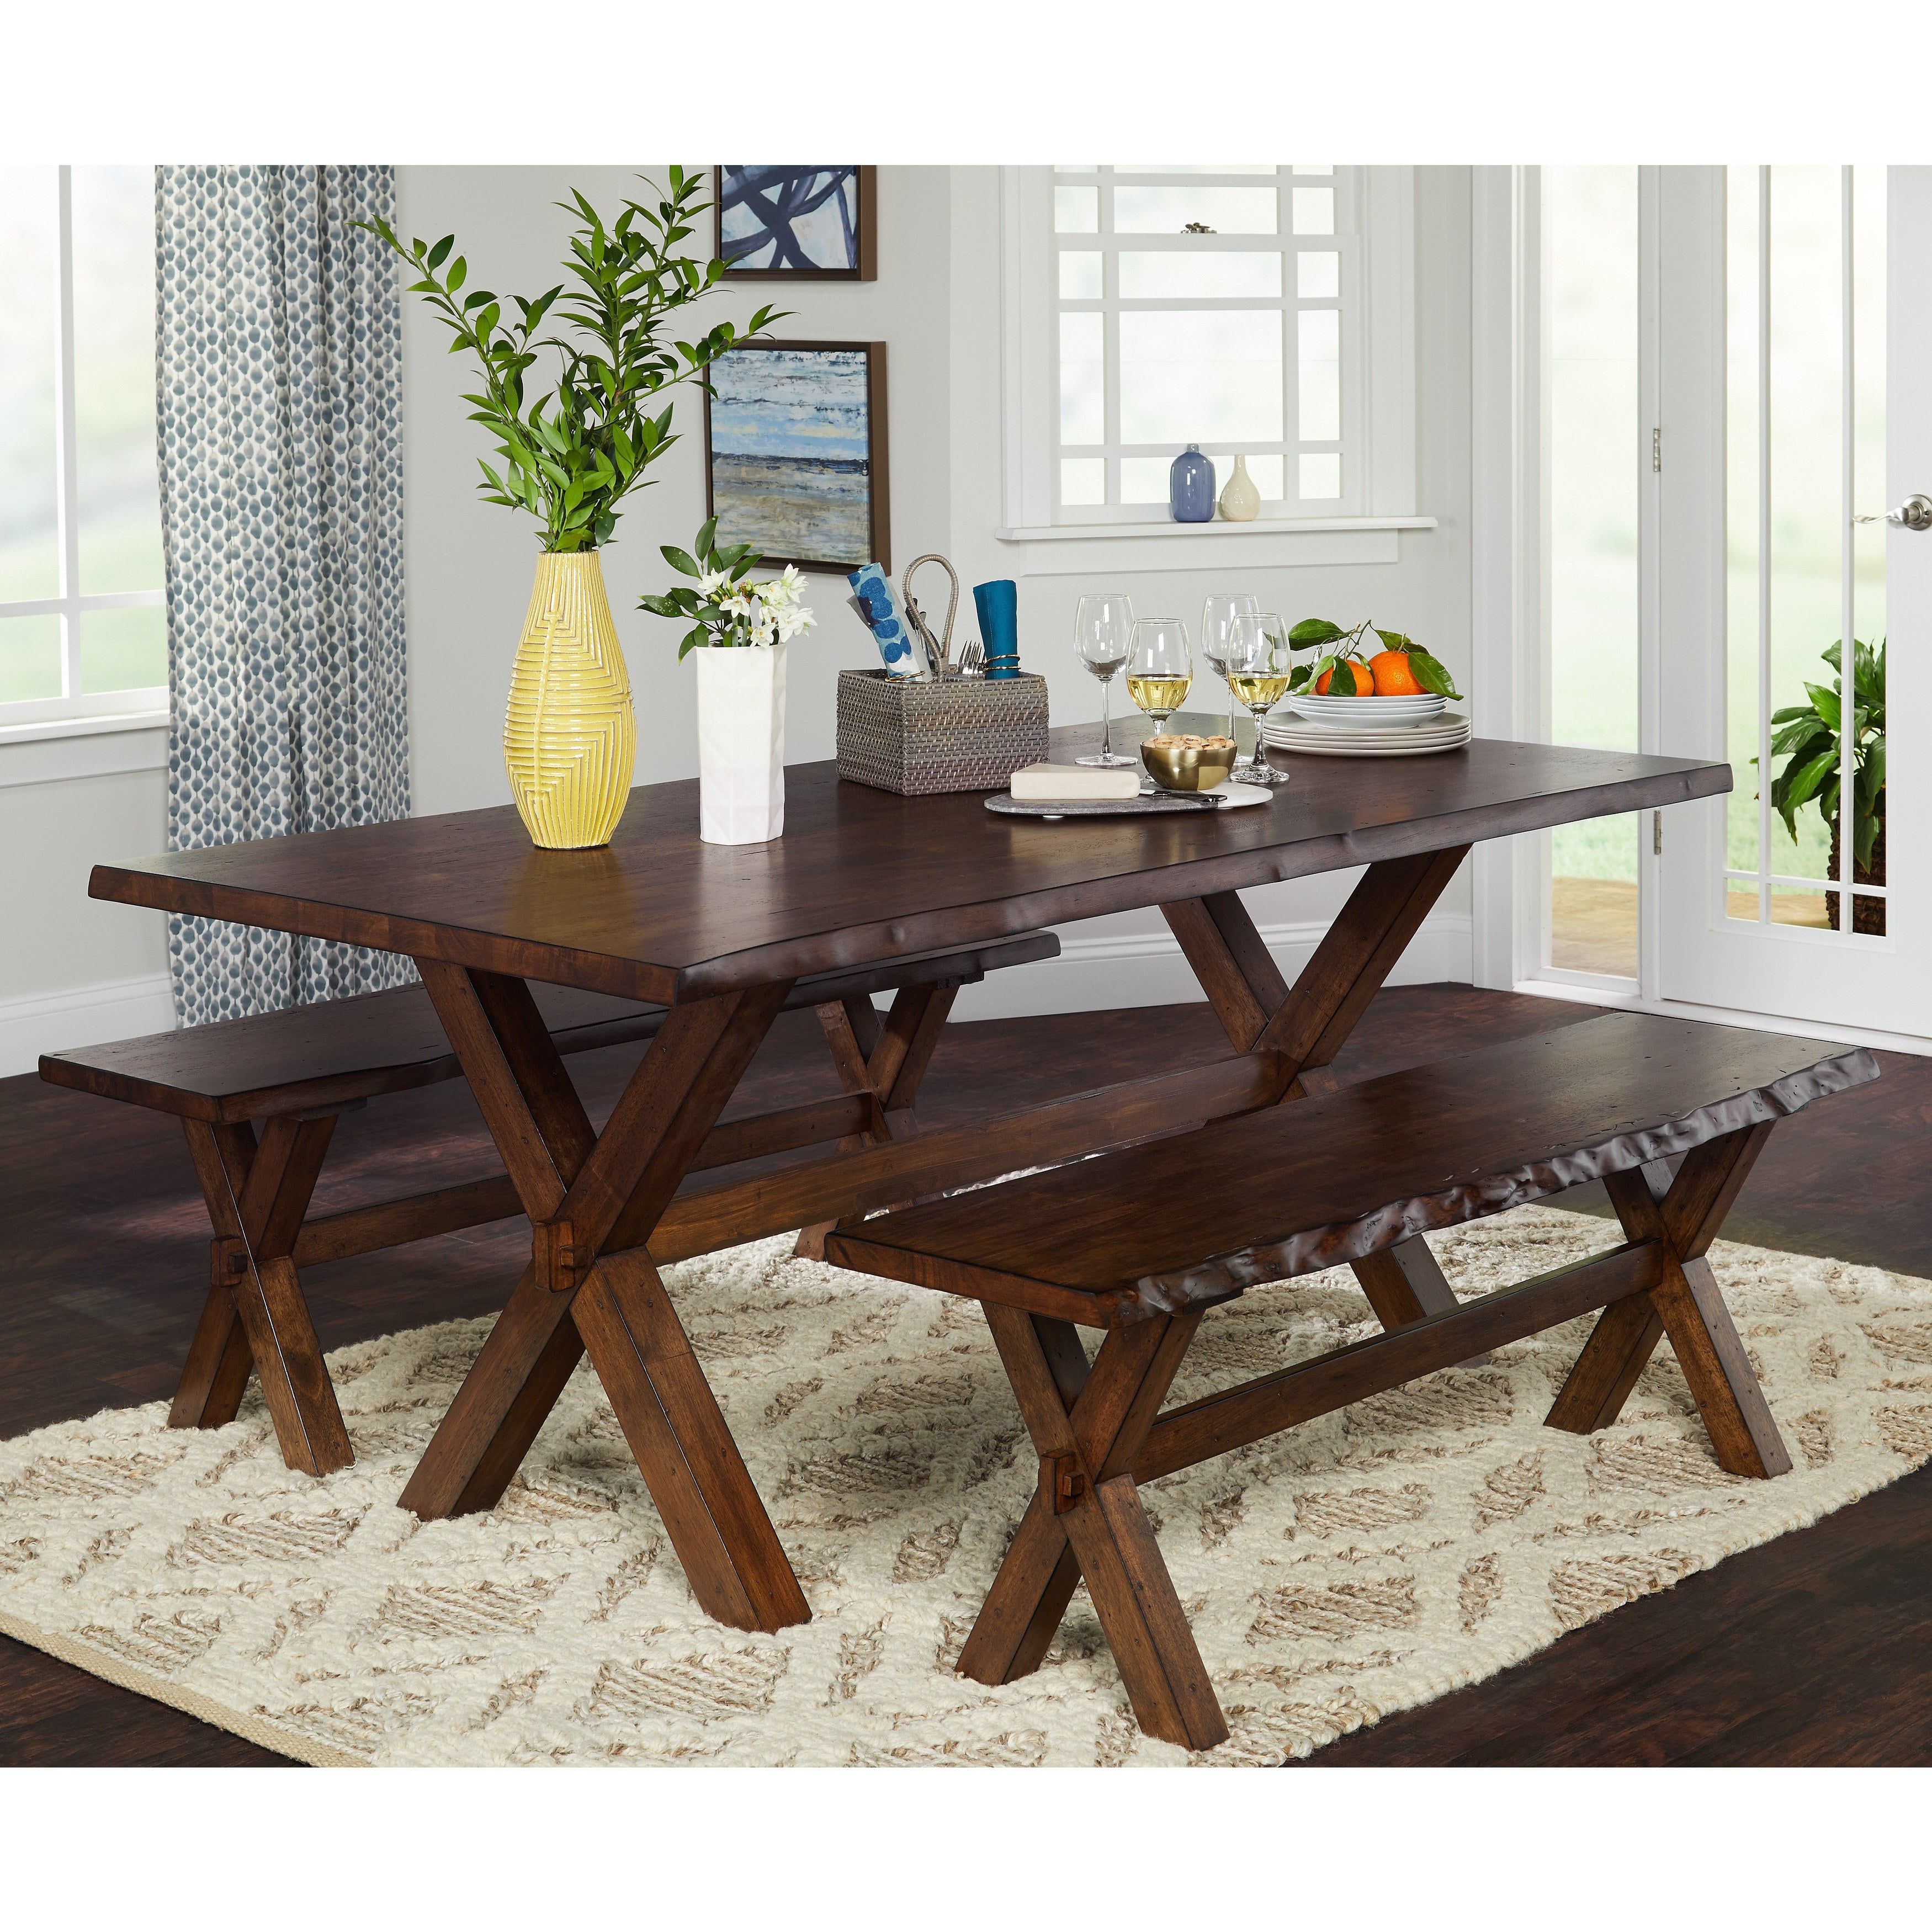 Buy 3 Piece Sets Kitchen & Dining Room Sets Online At Overstock Throughout Best And Newest Frida 3 Piece Dining Table Sets (Photo 3 of 20)